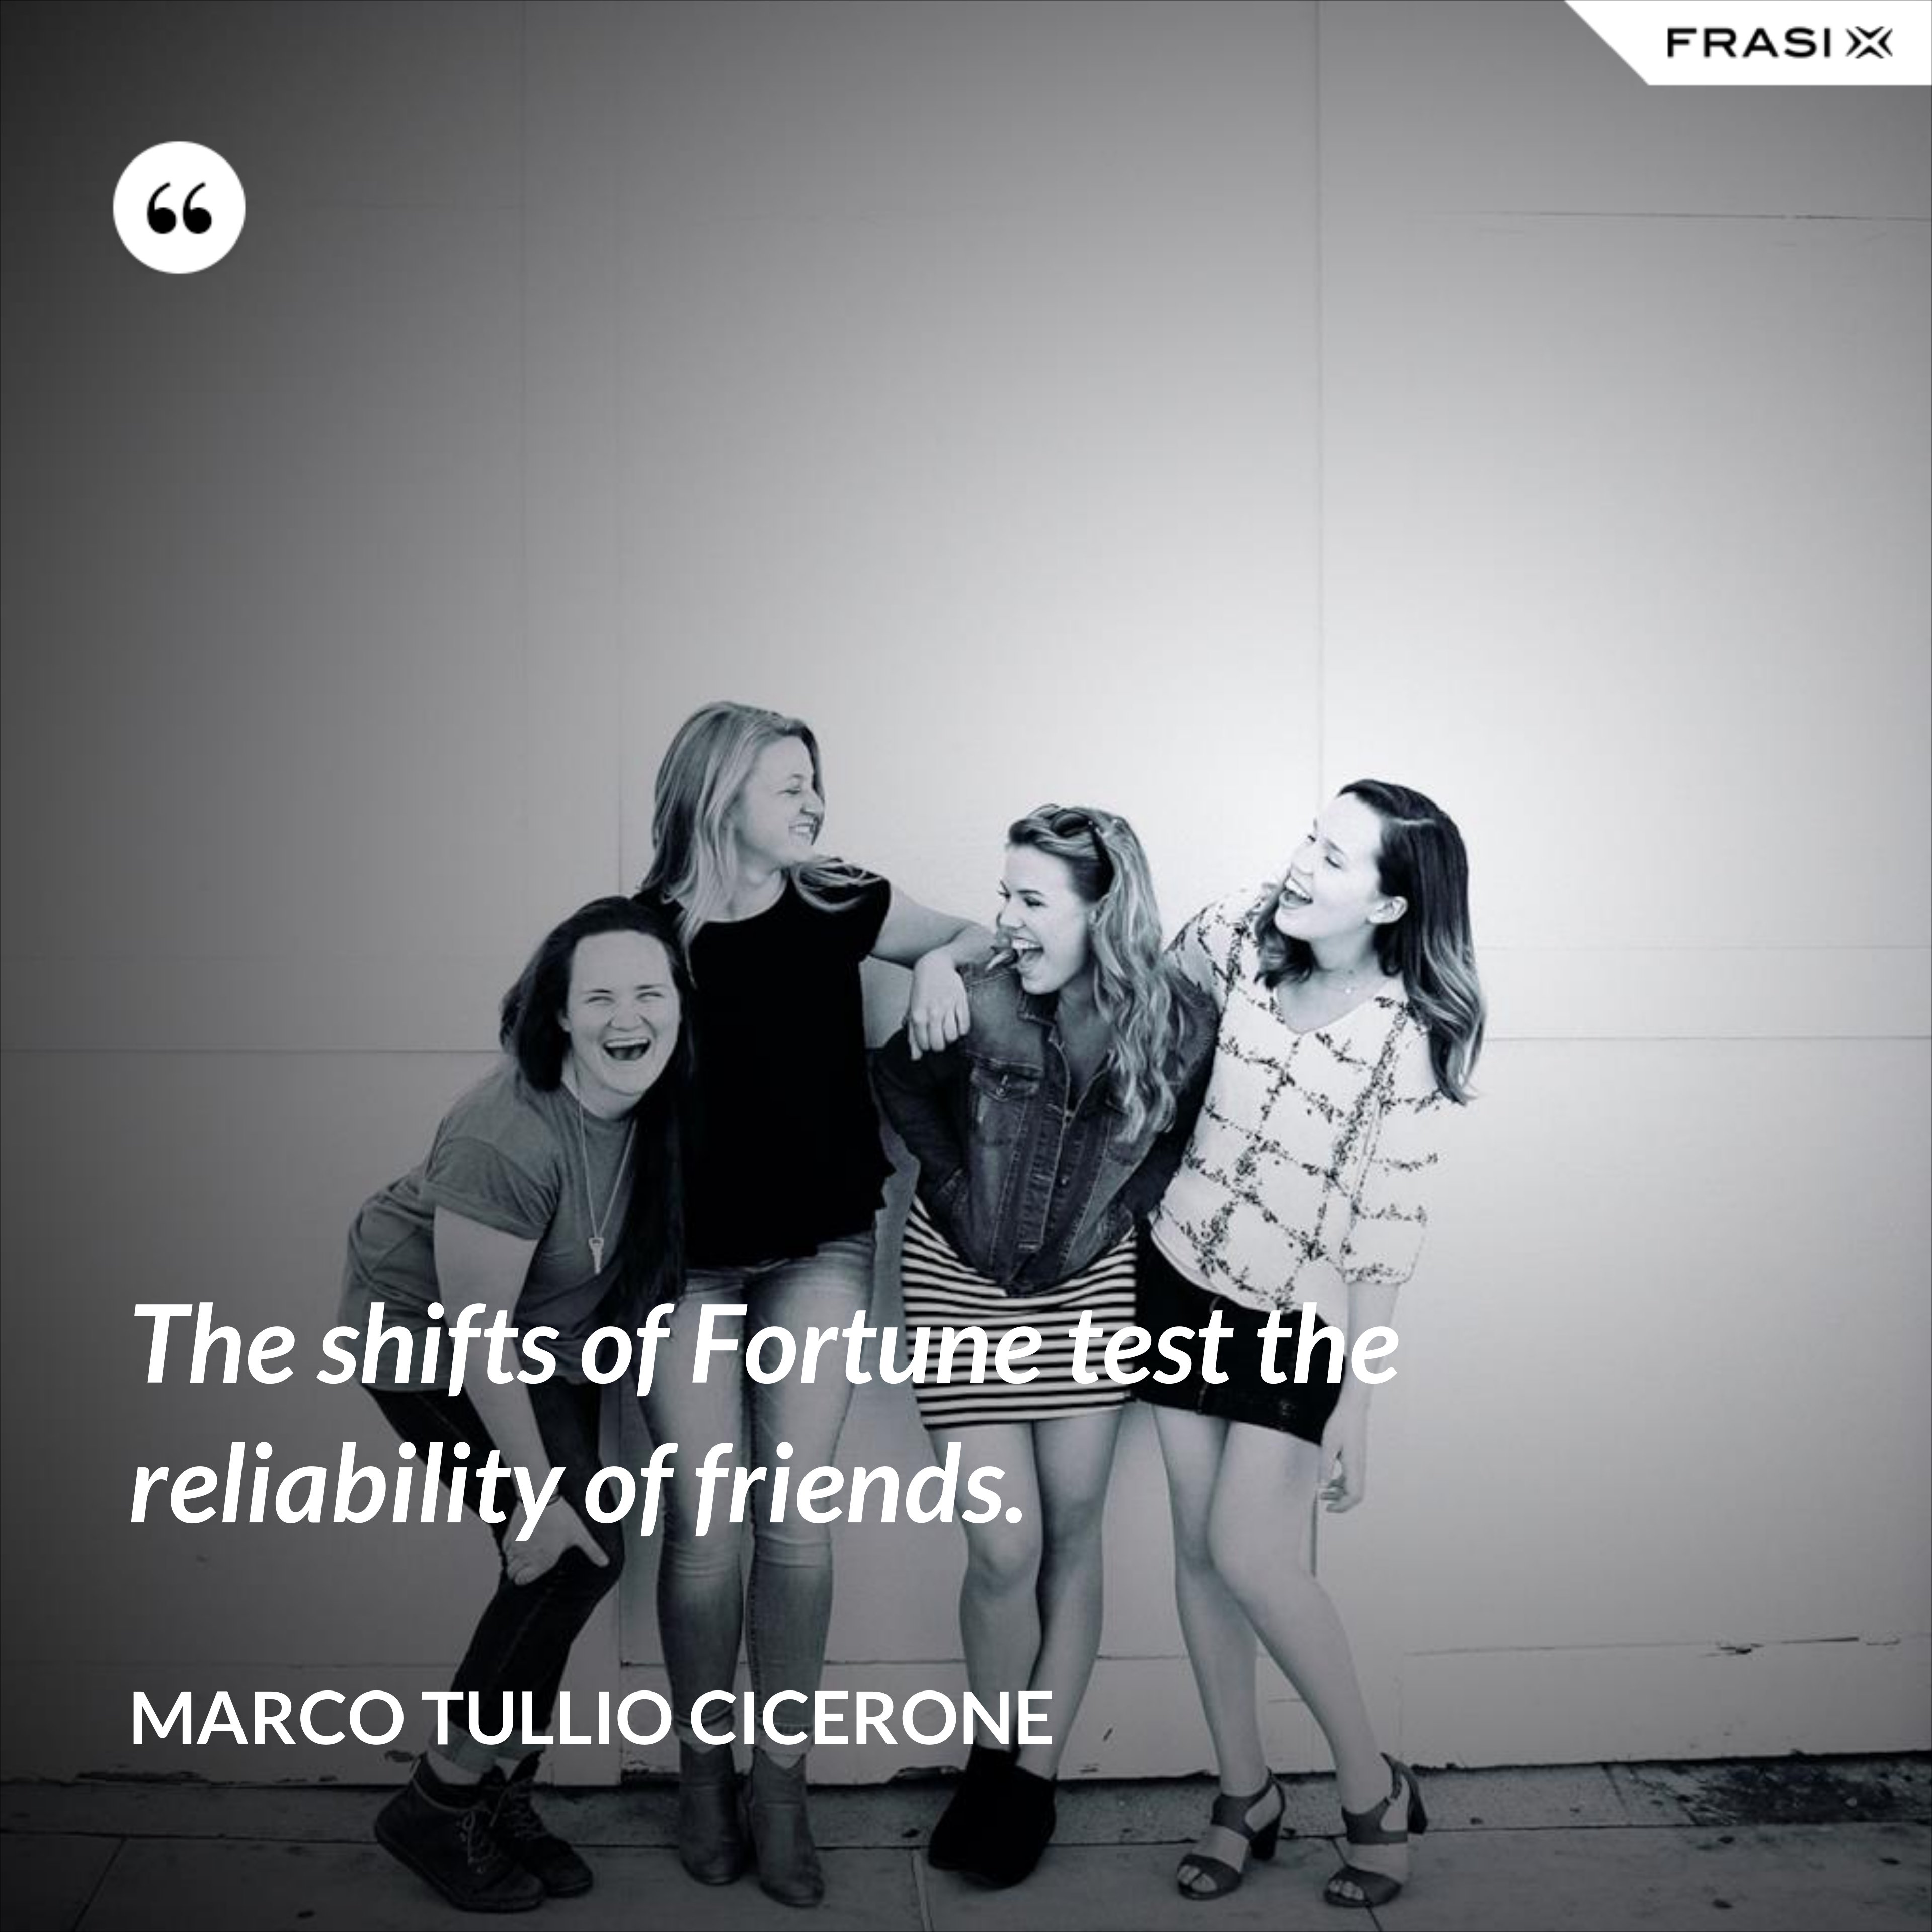 The shifts of Fortune test the reliability of friends. - Marco Tullio Cicerone